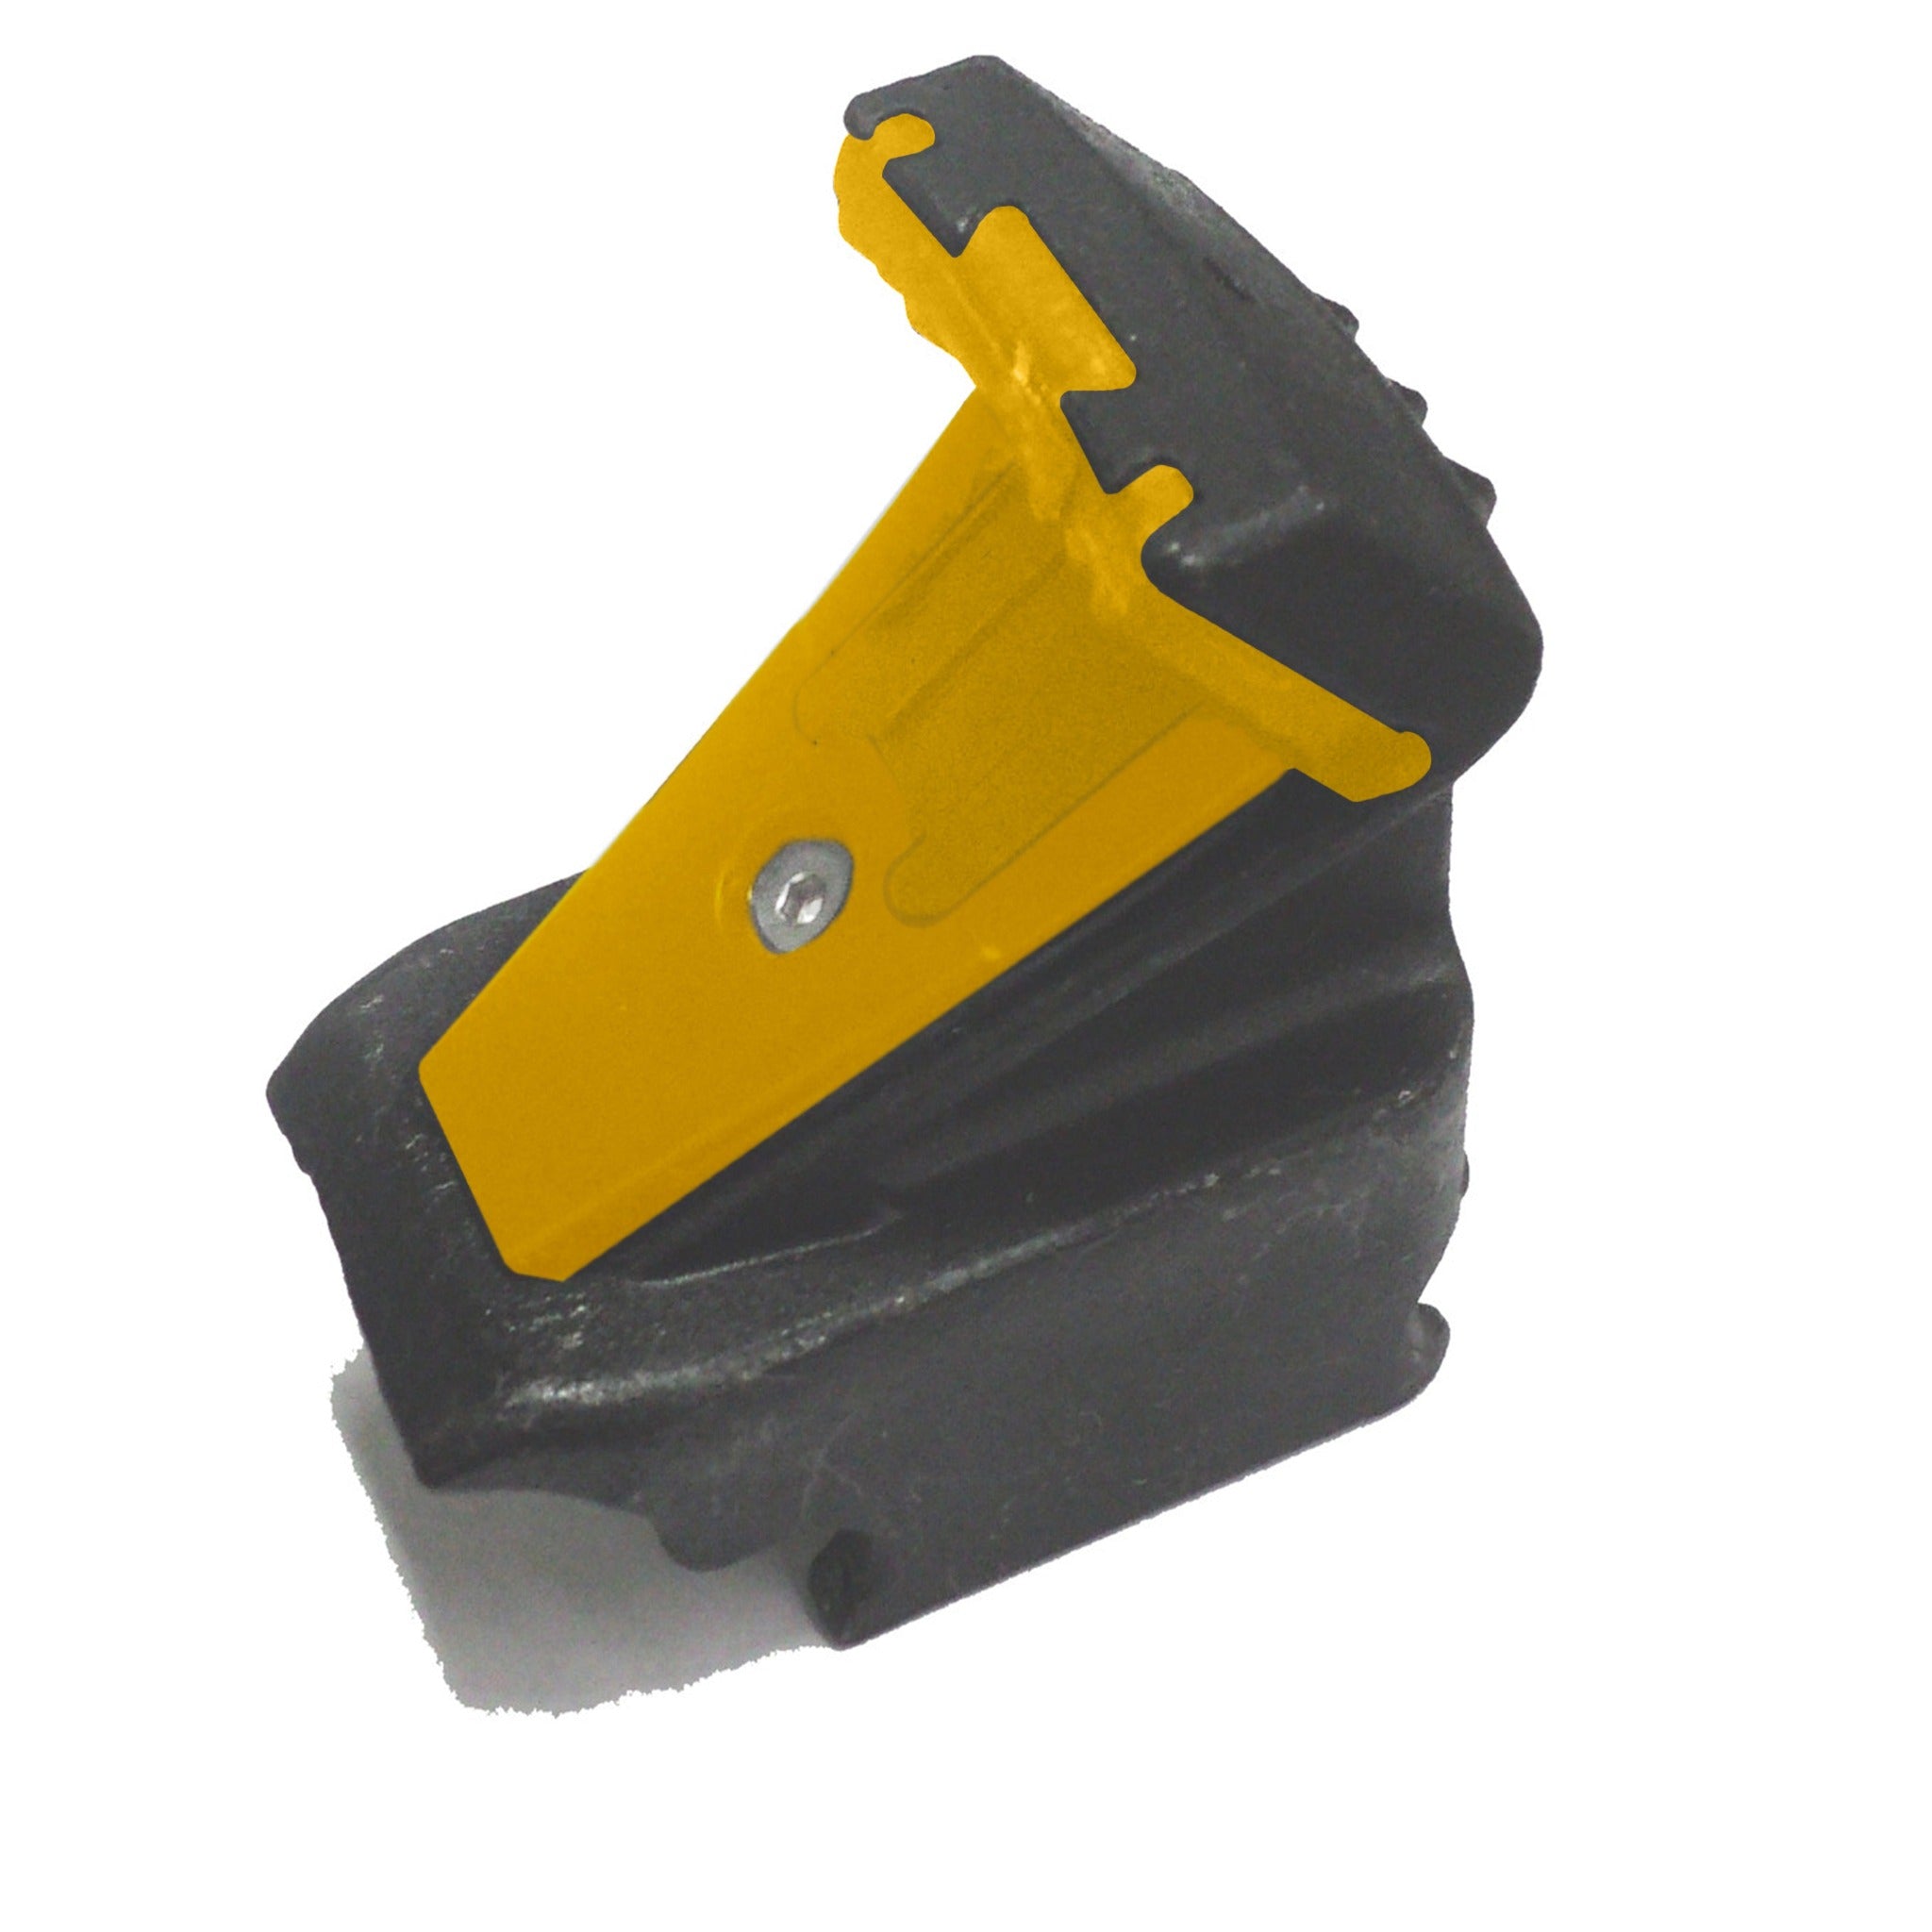 Clamping Jaw Insert Kit for Ranger R980 Tire Changers